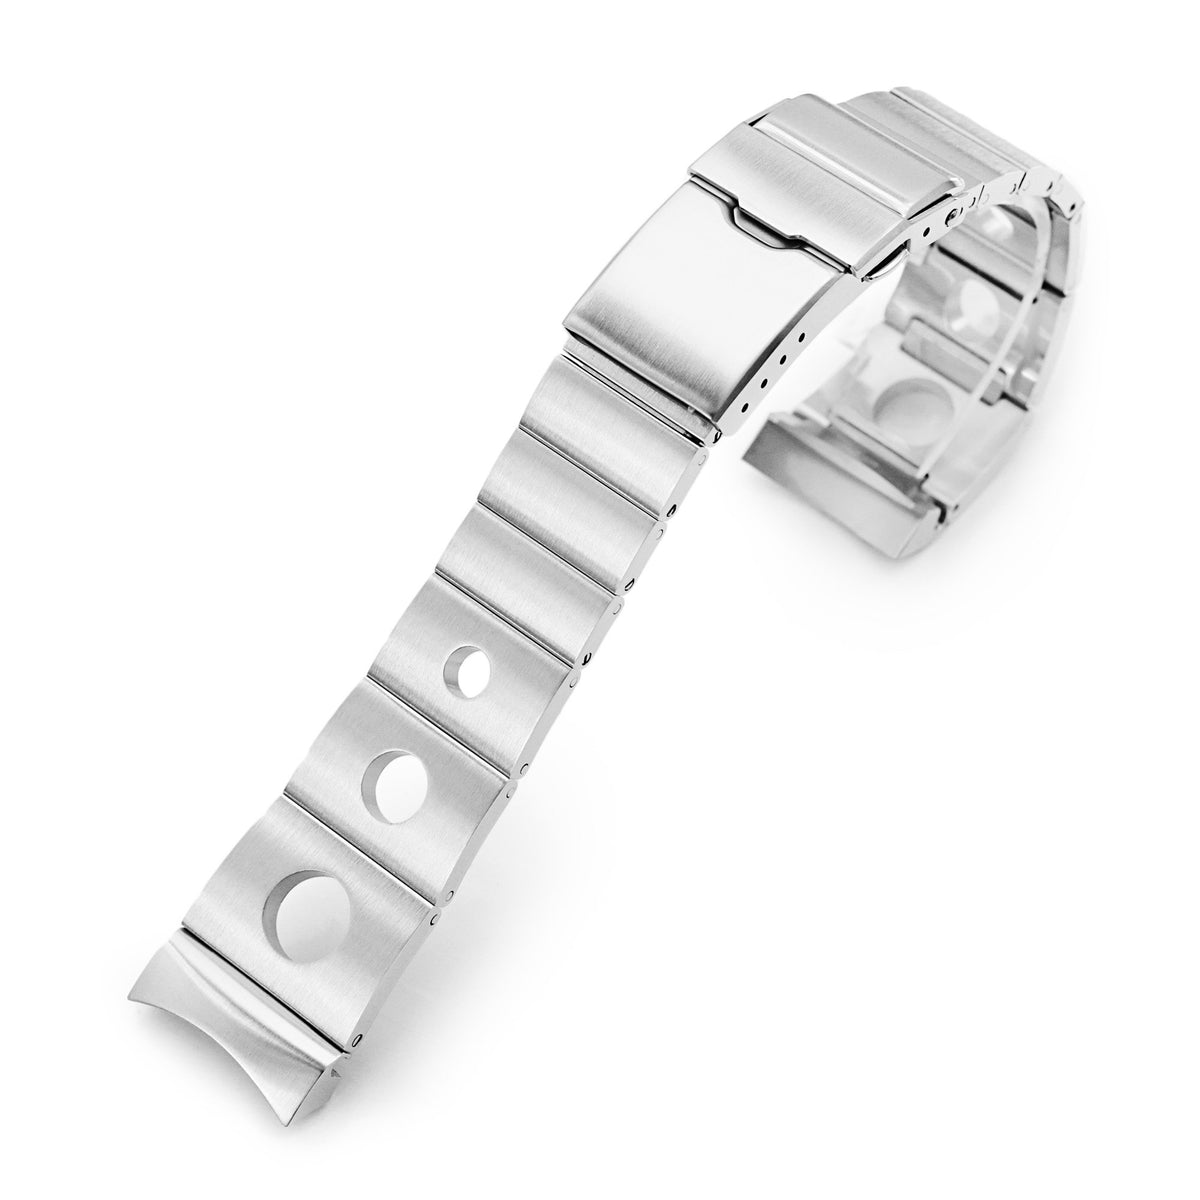 22mm Rollball version II Watch Band for Orient Kamasu, 316L Stainless Steel Brushed Baton Diver Clasp Strapcode Watch Bands